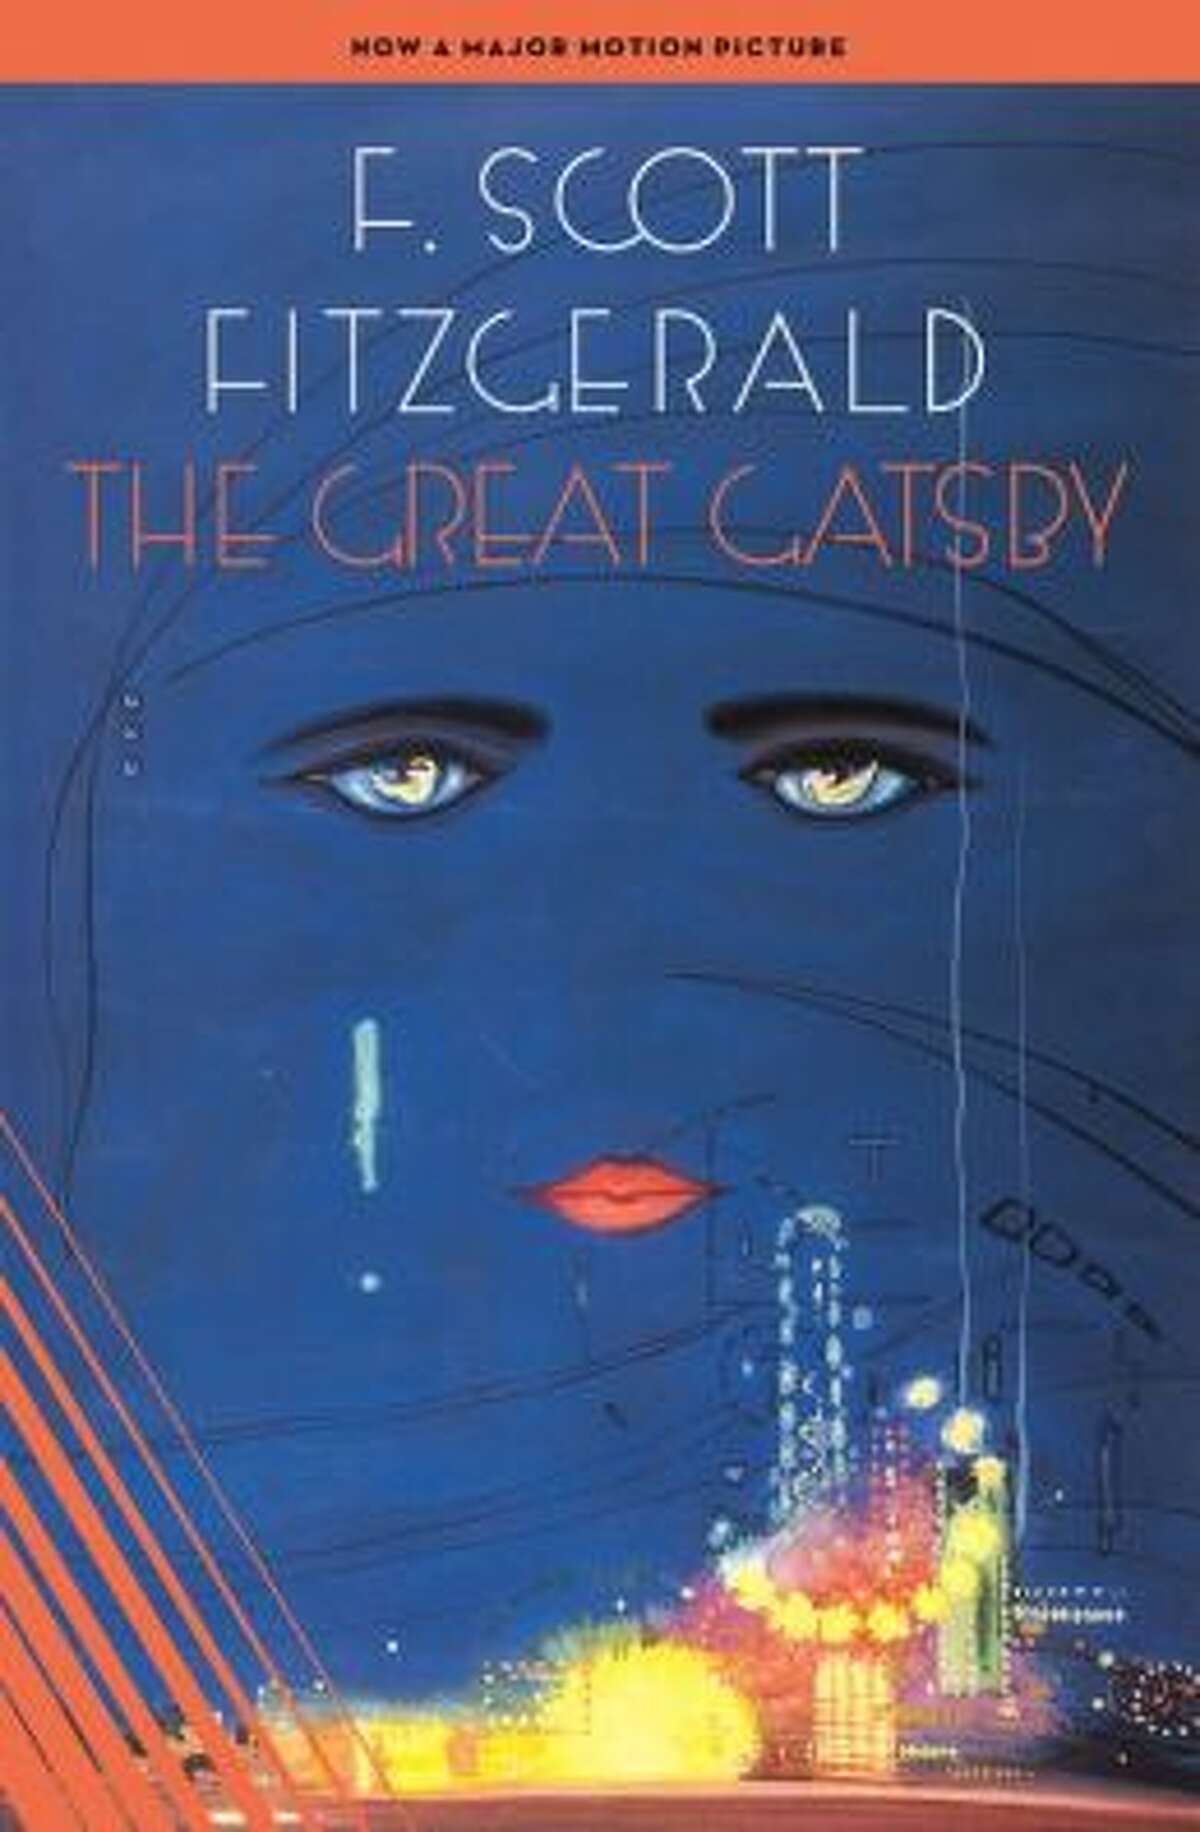 The Great Gatsby download the last version for ipod